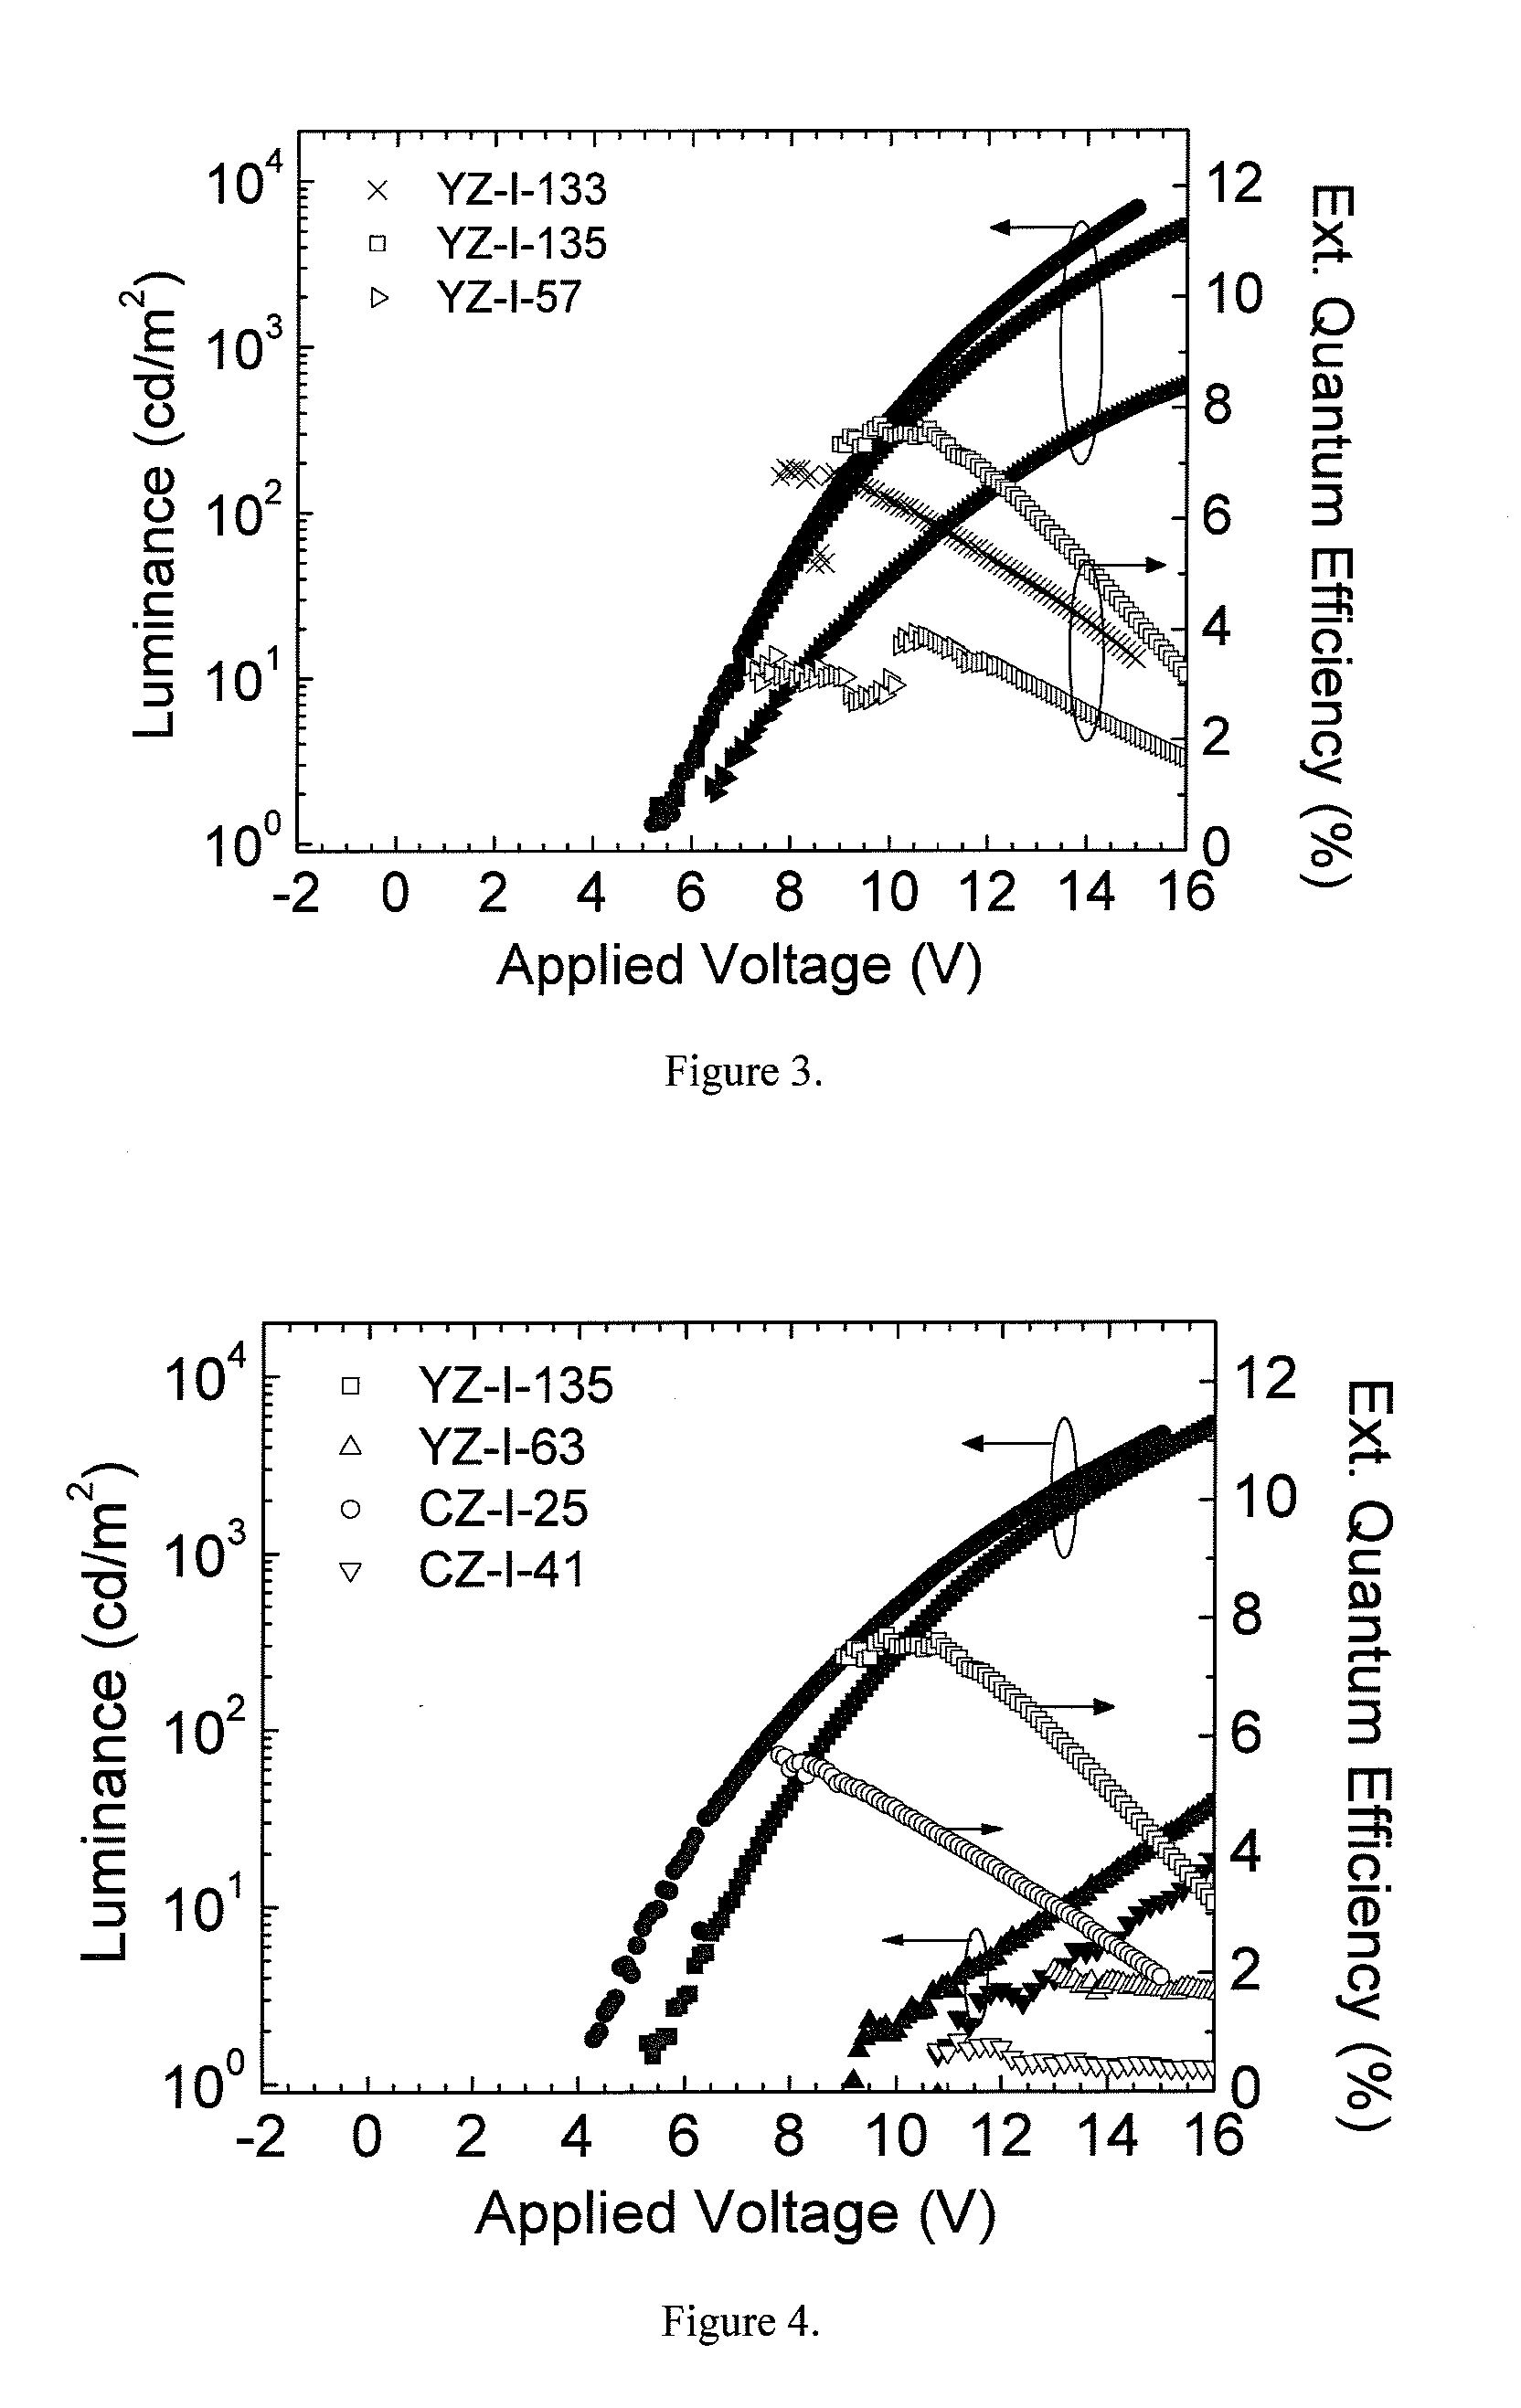 Carbazole-based hole transport and/or electron blocking materials and/or host polymer materials